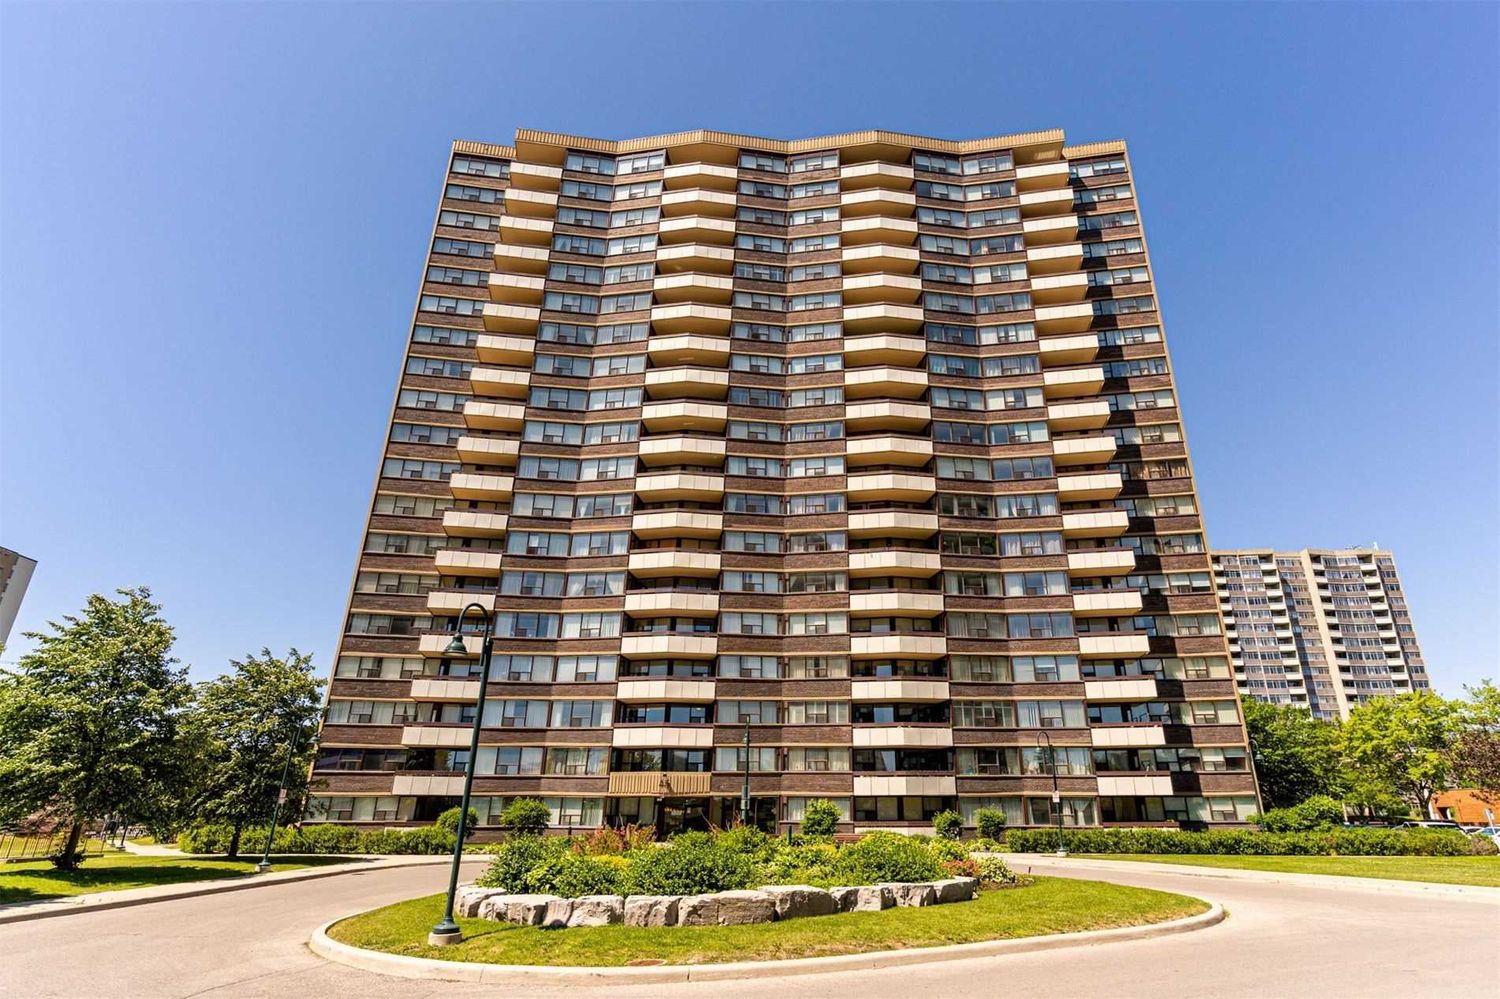 45-65 Huntingdale Boulevard. Royal Crest III Condos is located in  Scarborough, Toronto - image #1 of 2